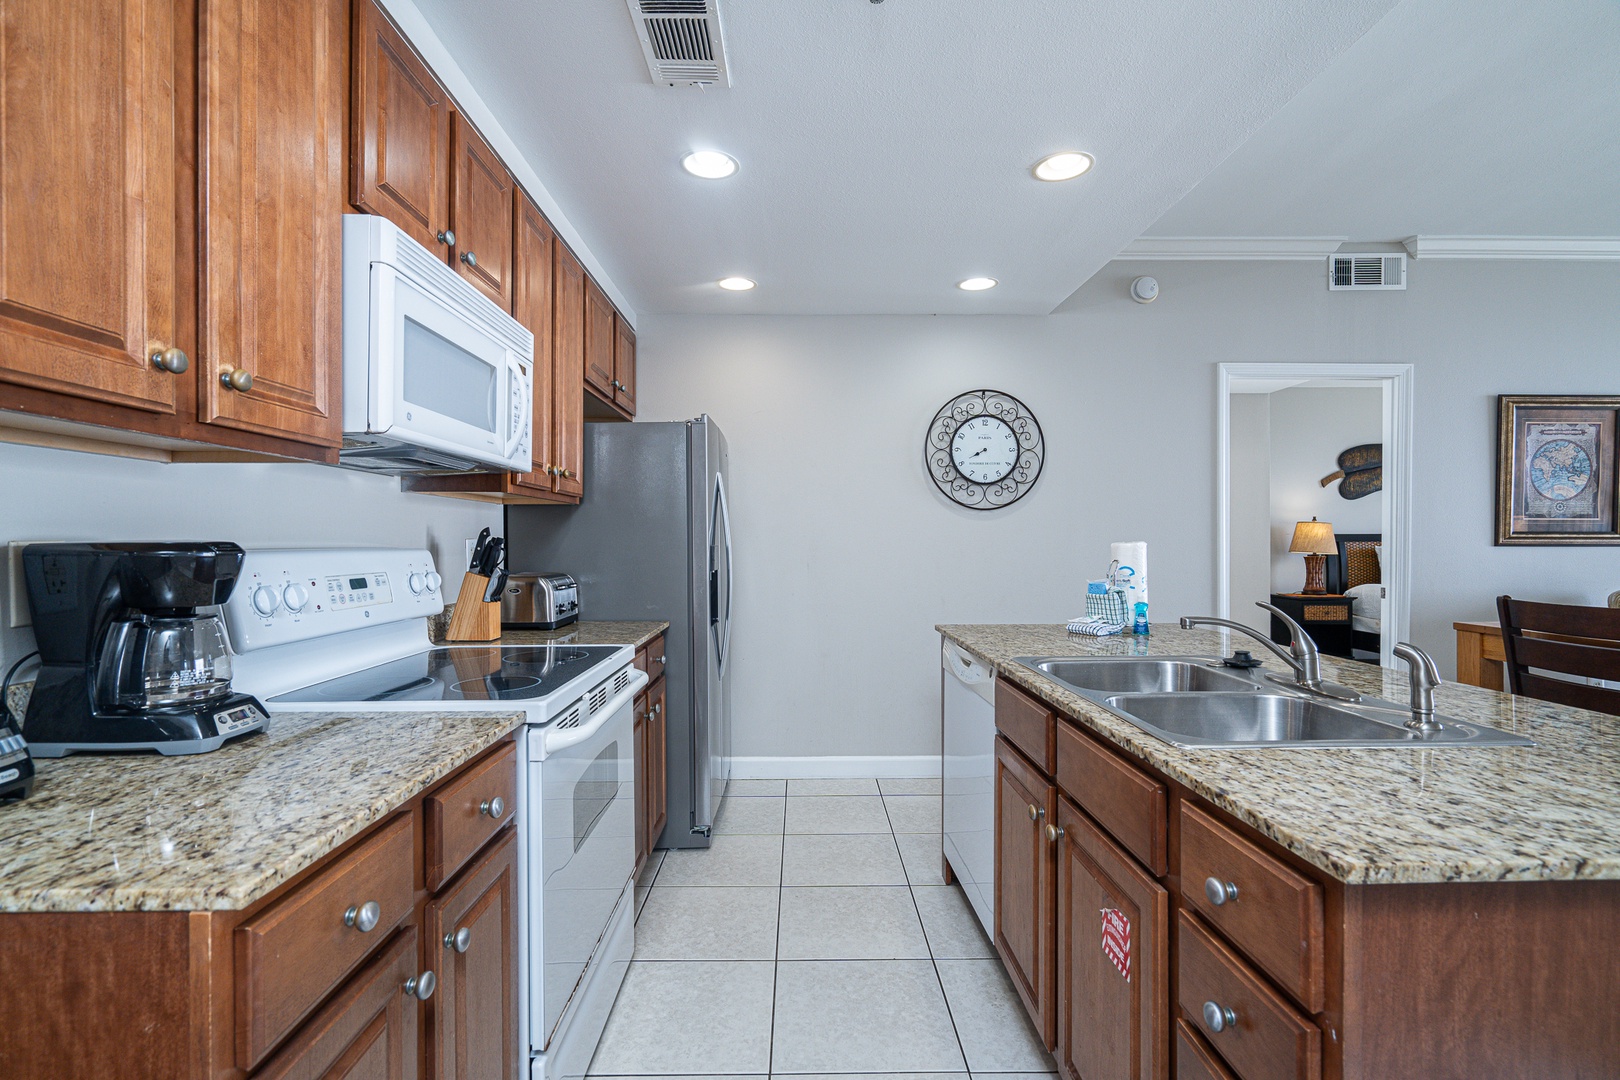 The bright, open kitchen offers ample space & all the comforts of home